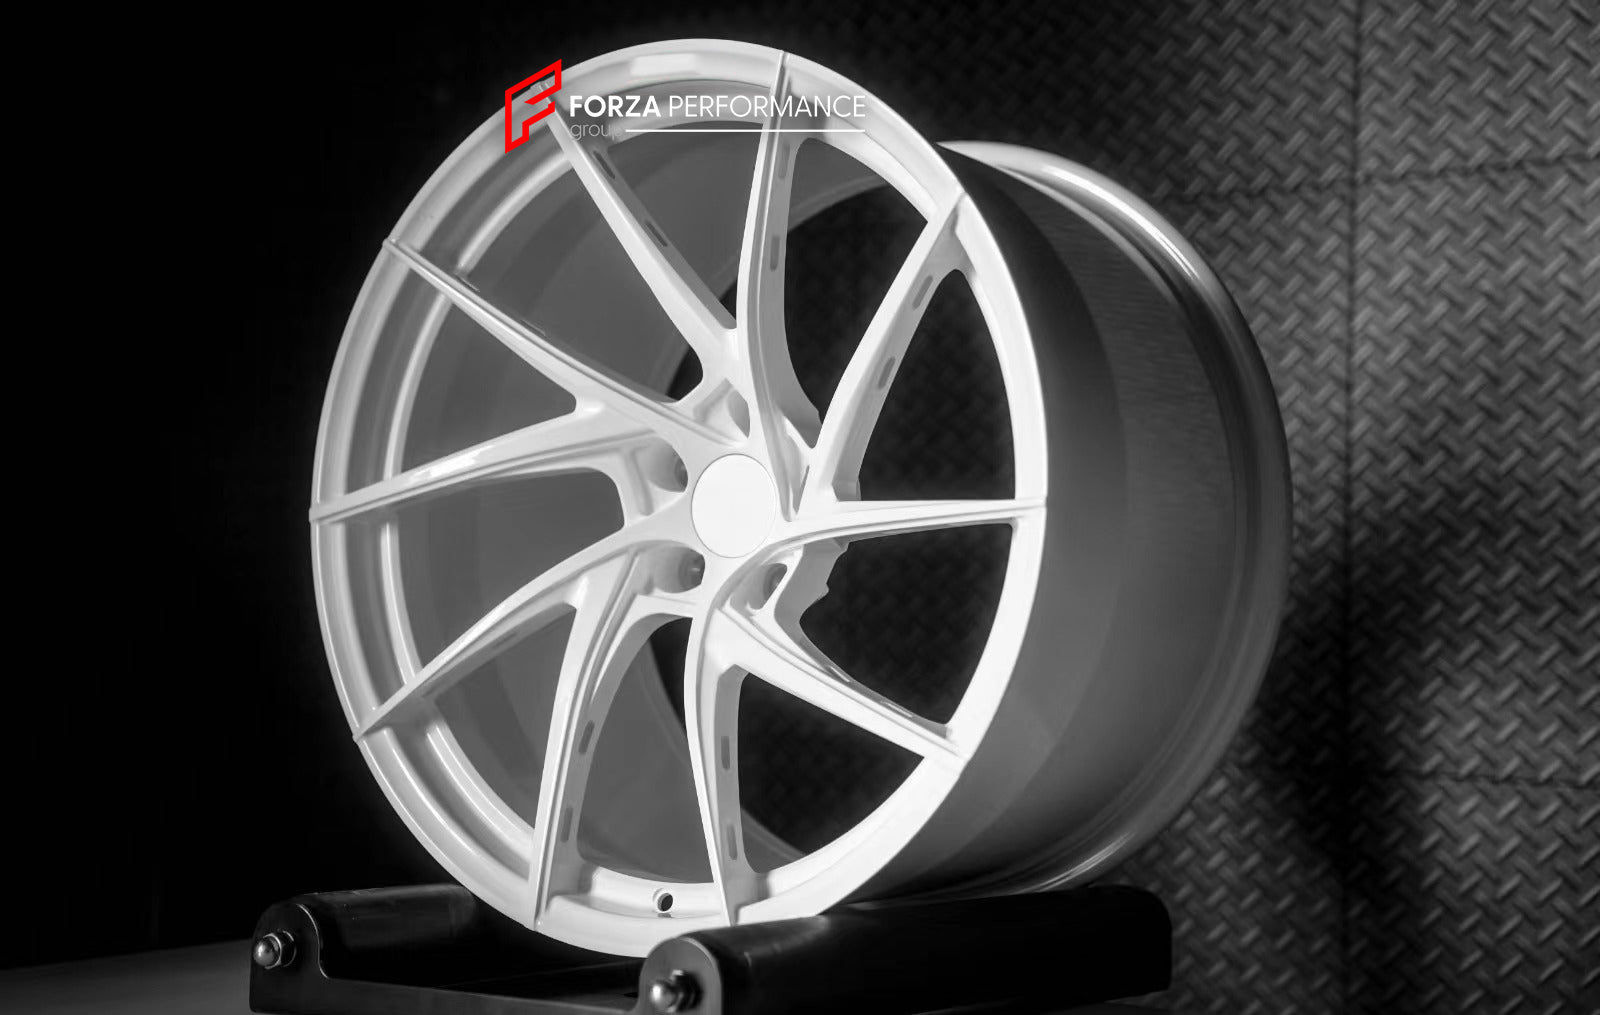 Brand New Forged Magnesium Wheels by Forza Performace Group